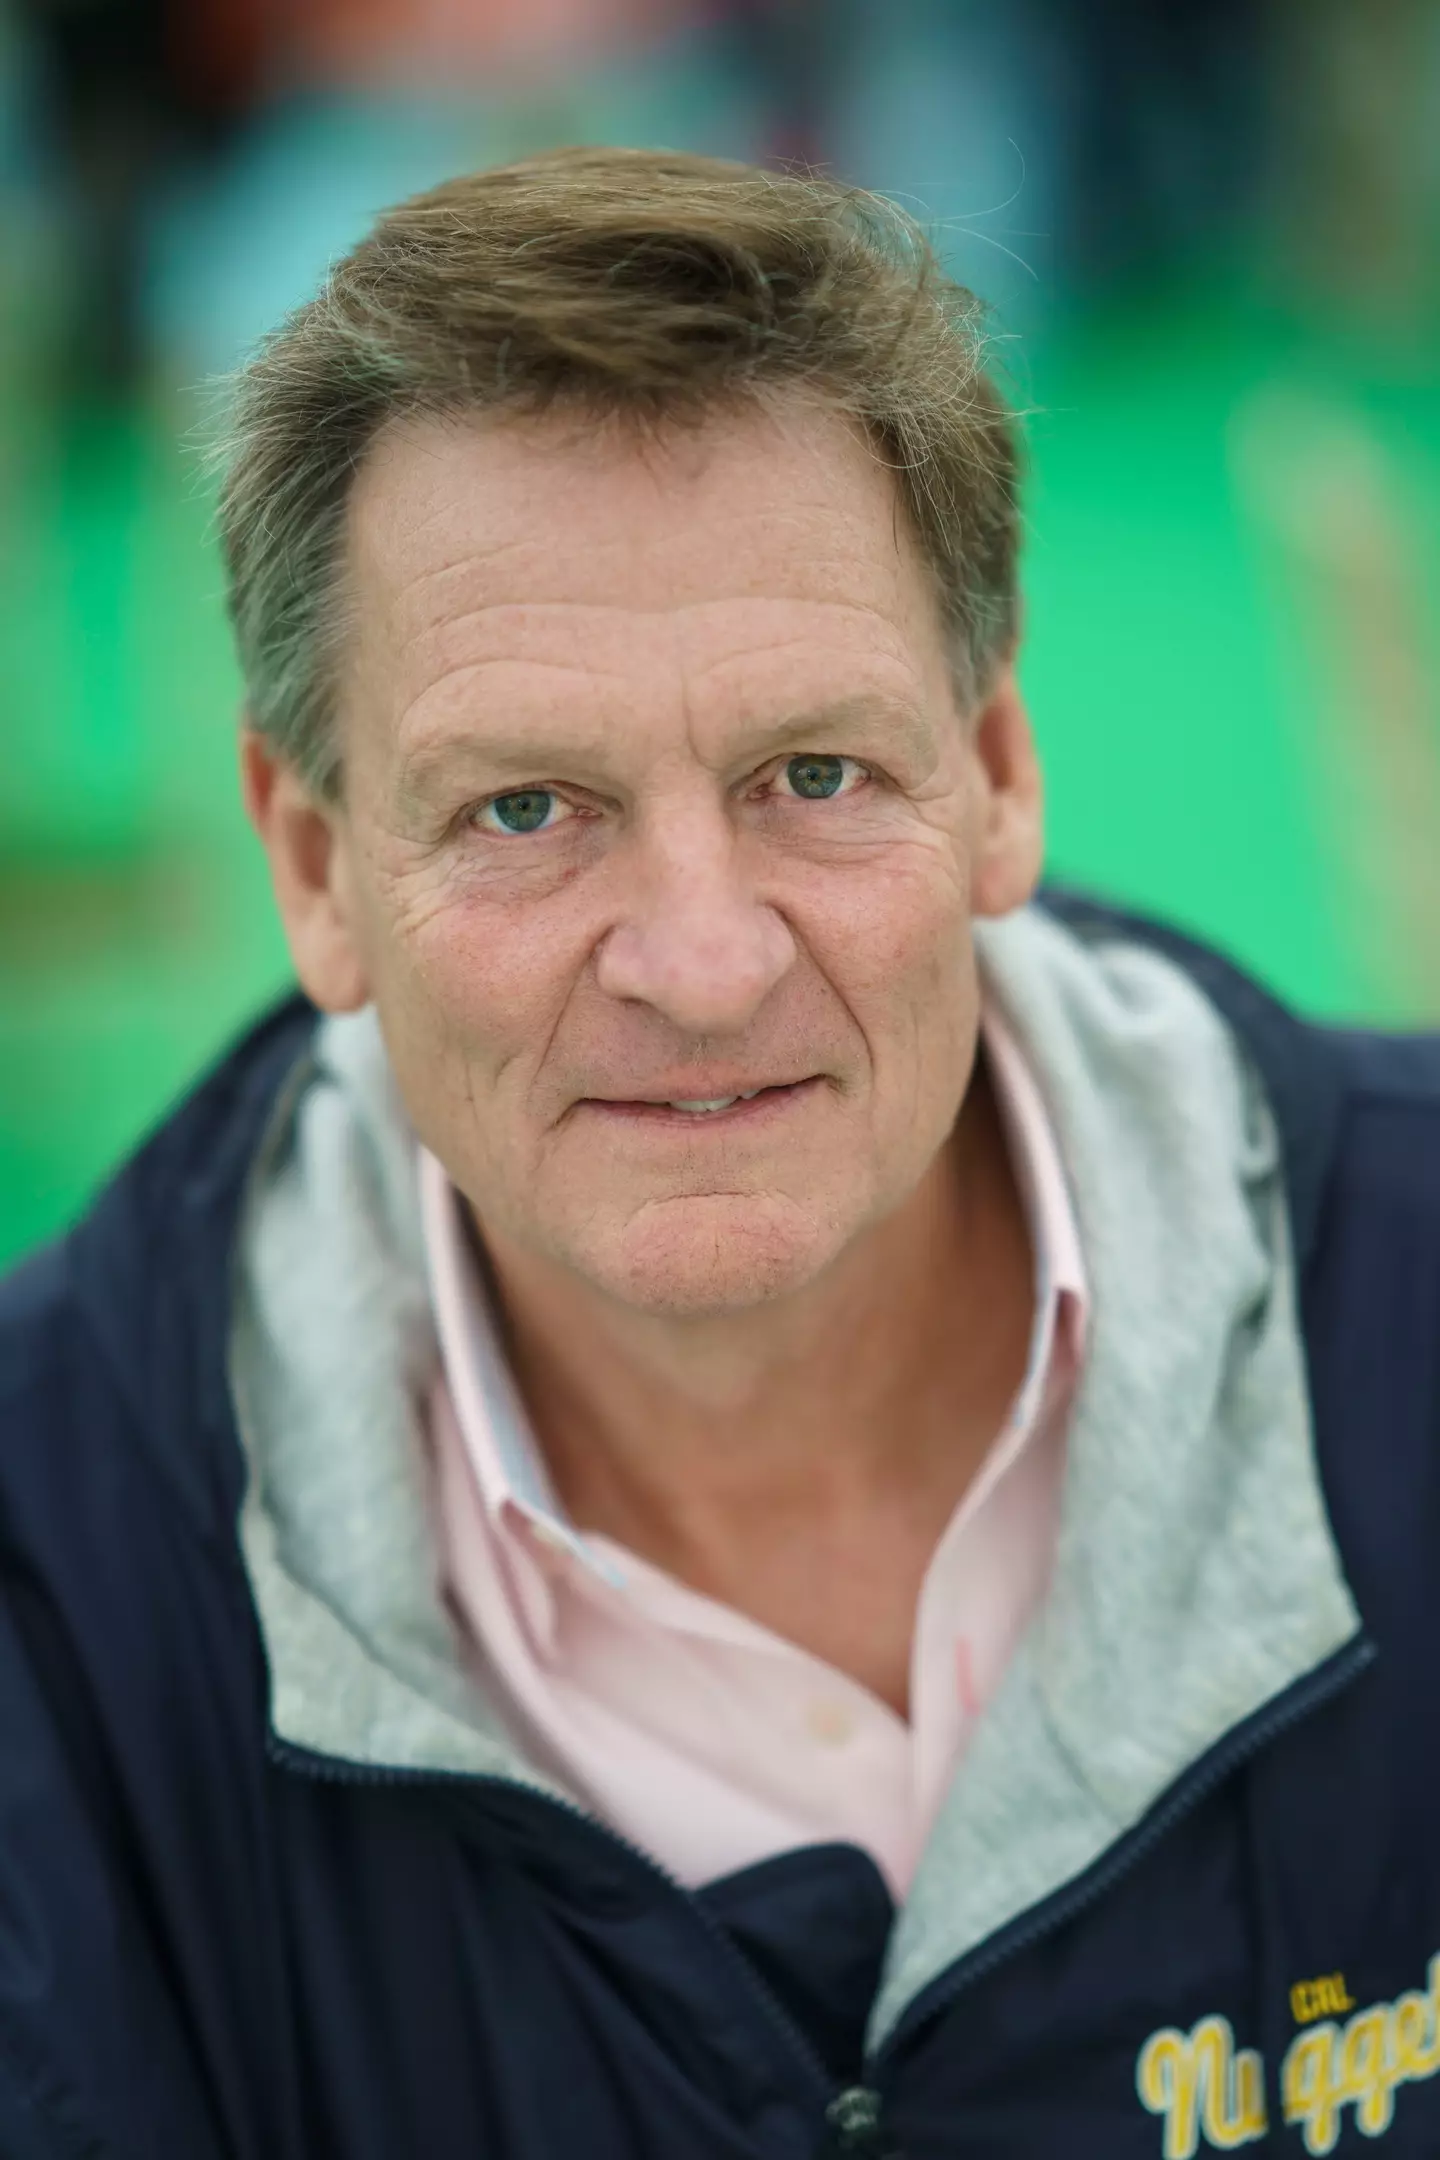 Michael Lewis wrote The Blind Side book, which was later turned into a film.